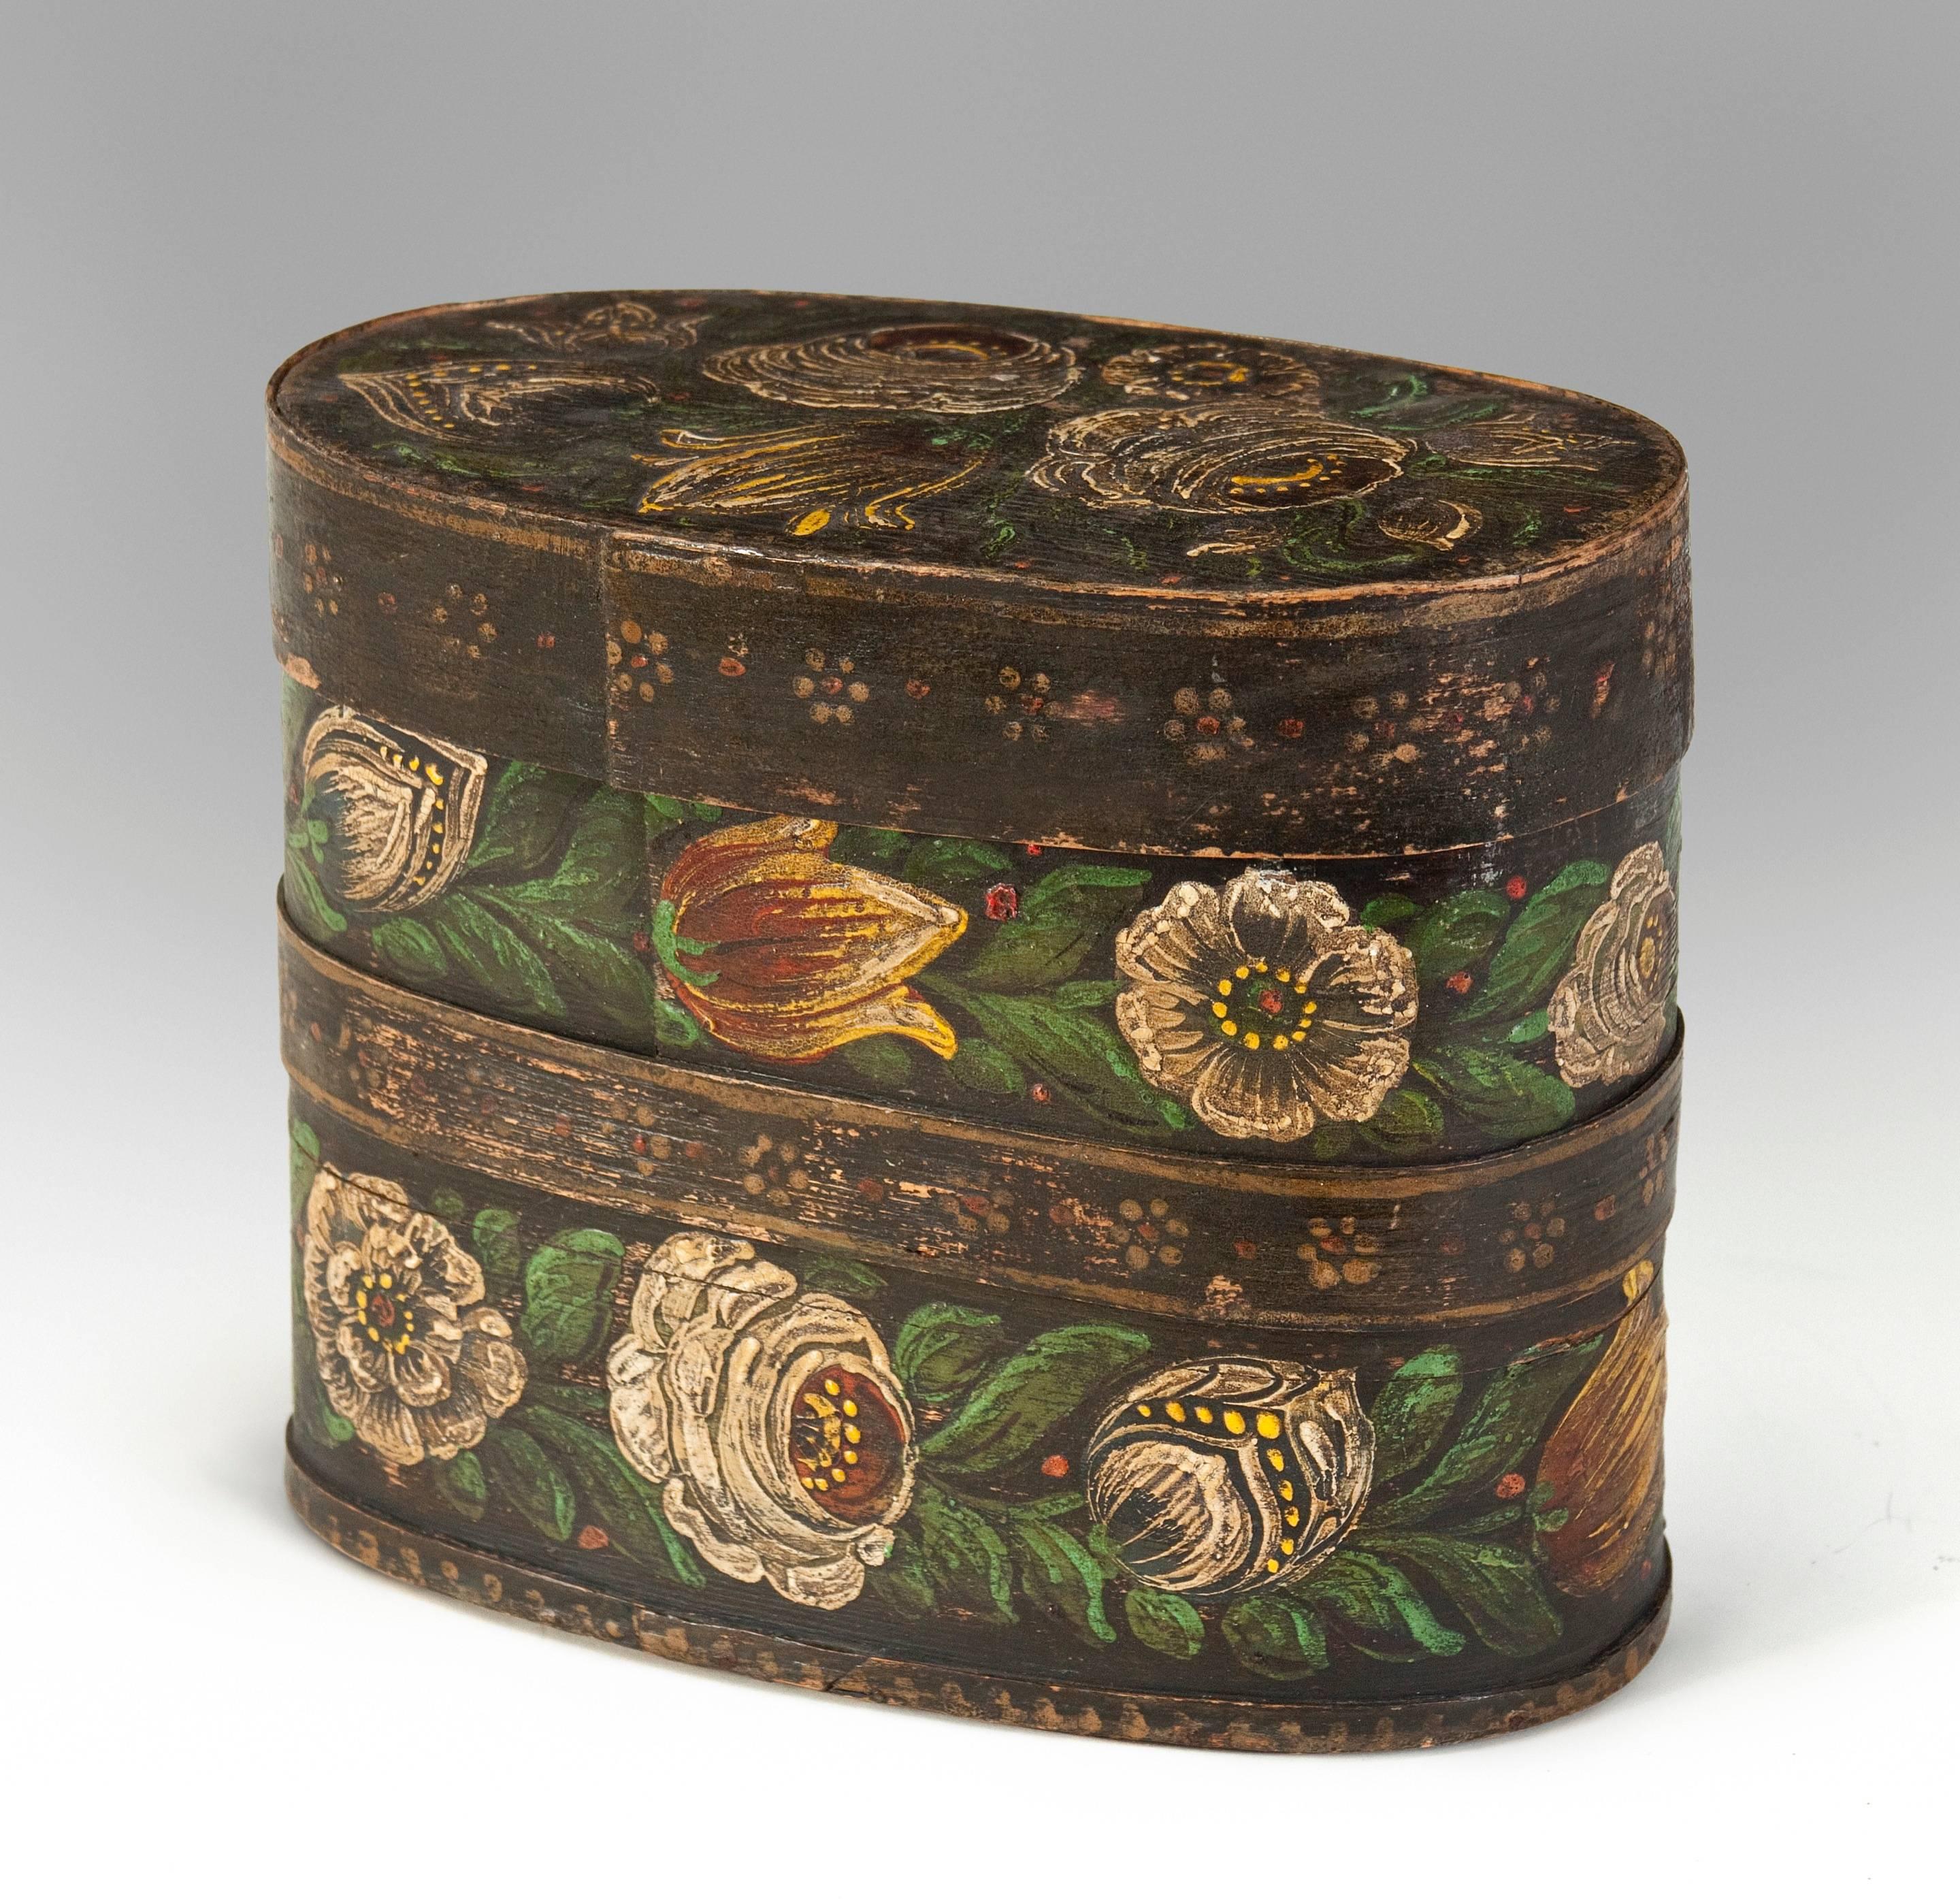 A beautiful example of an early painted box adorned with lovely flowers. The oval lid with a floral bouquet and a rim of a frieze of daisies, the base decorated with garlands of tulips, roses and peonies separated by a band of daisies.